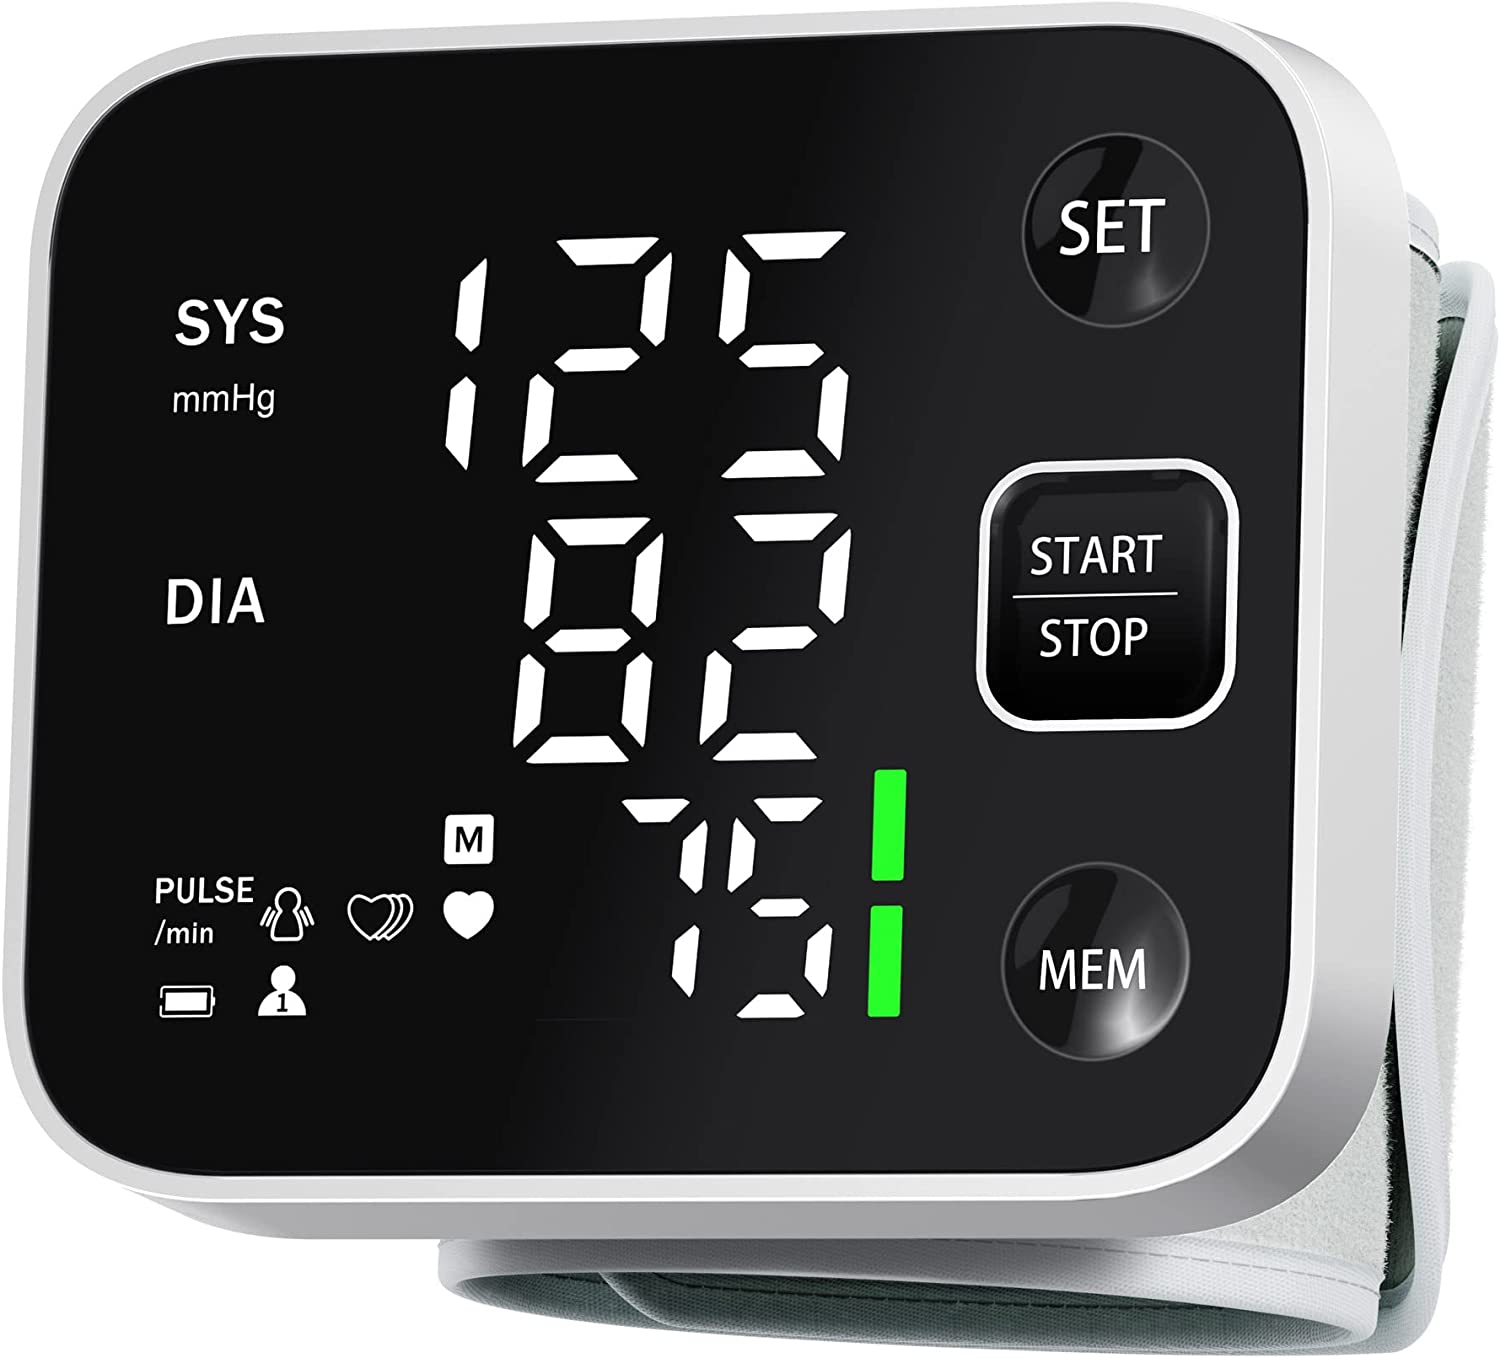 Konquest - Konquest BPM-2704A Blood Pressure Monitor. Clinically Accurate -  Easy Operation, One key Start/Stop measurement, large backlit display, With  the built-in memory function you can recall the last 120 readings for